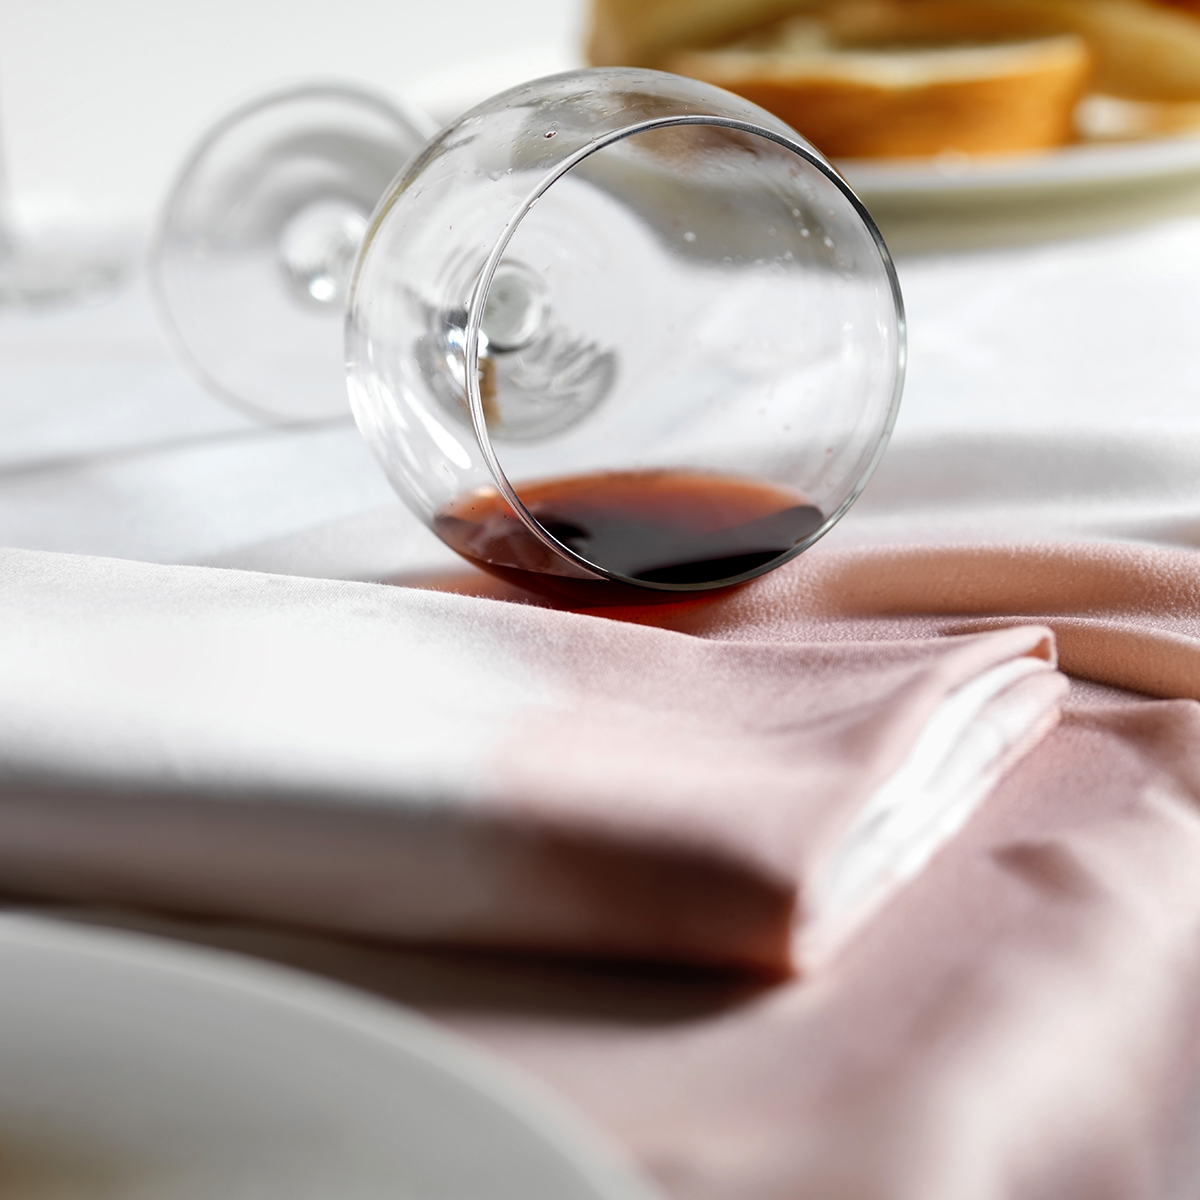 Red wine spill stain on linens